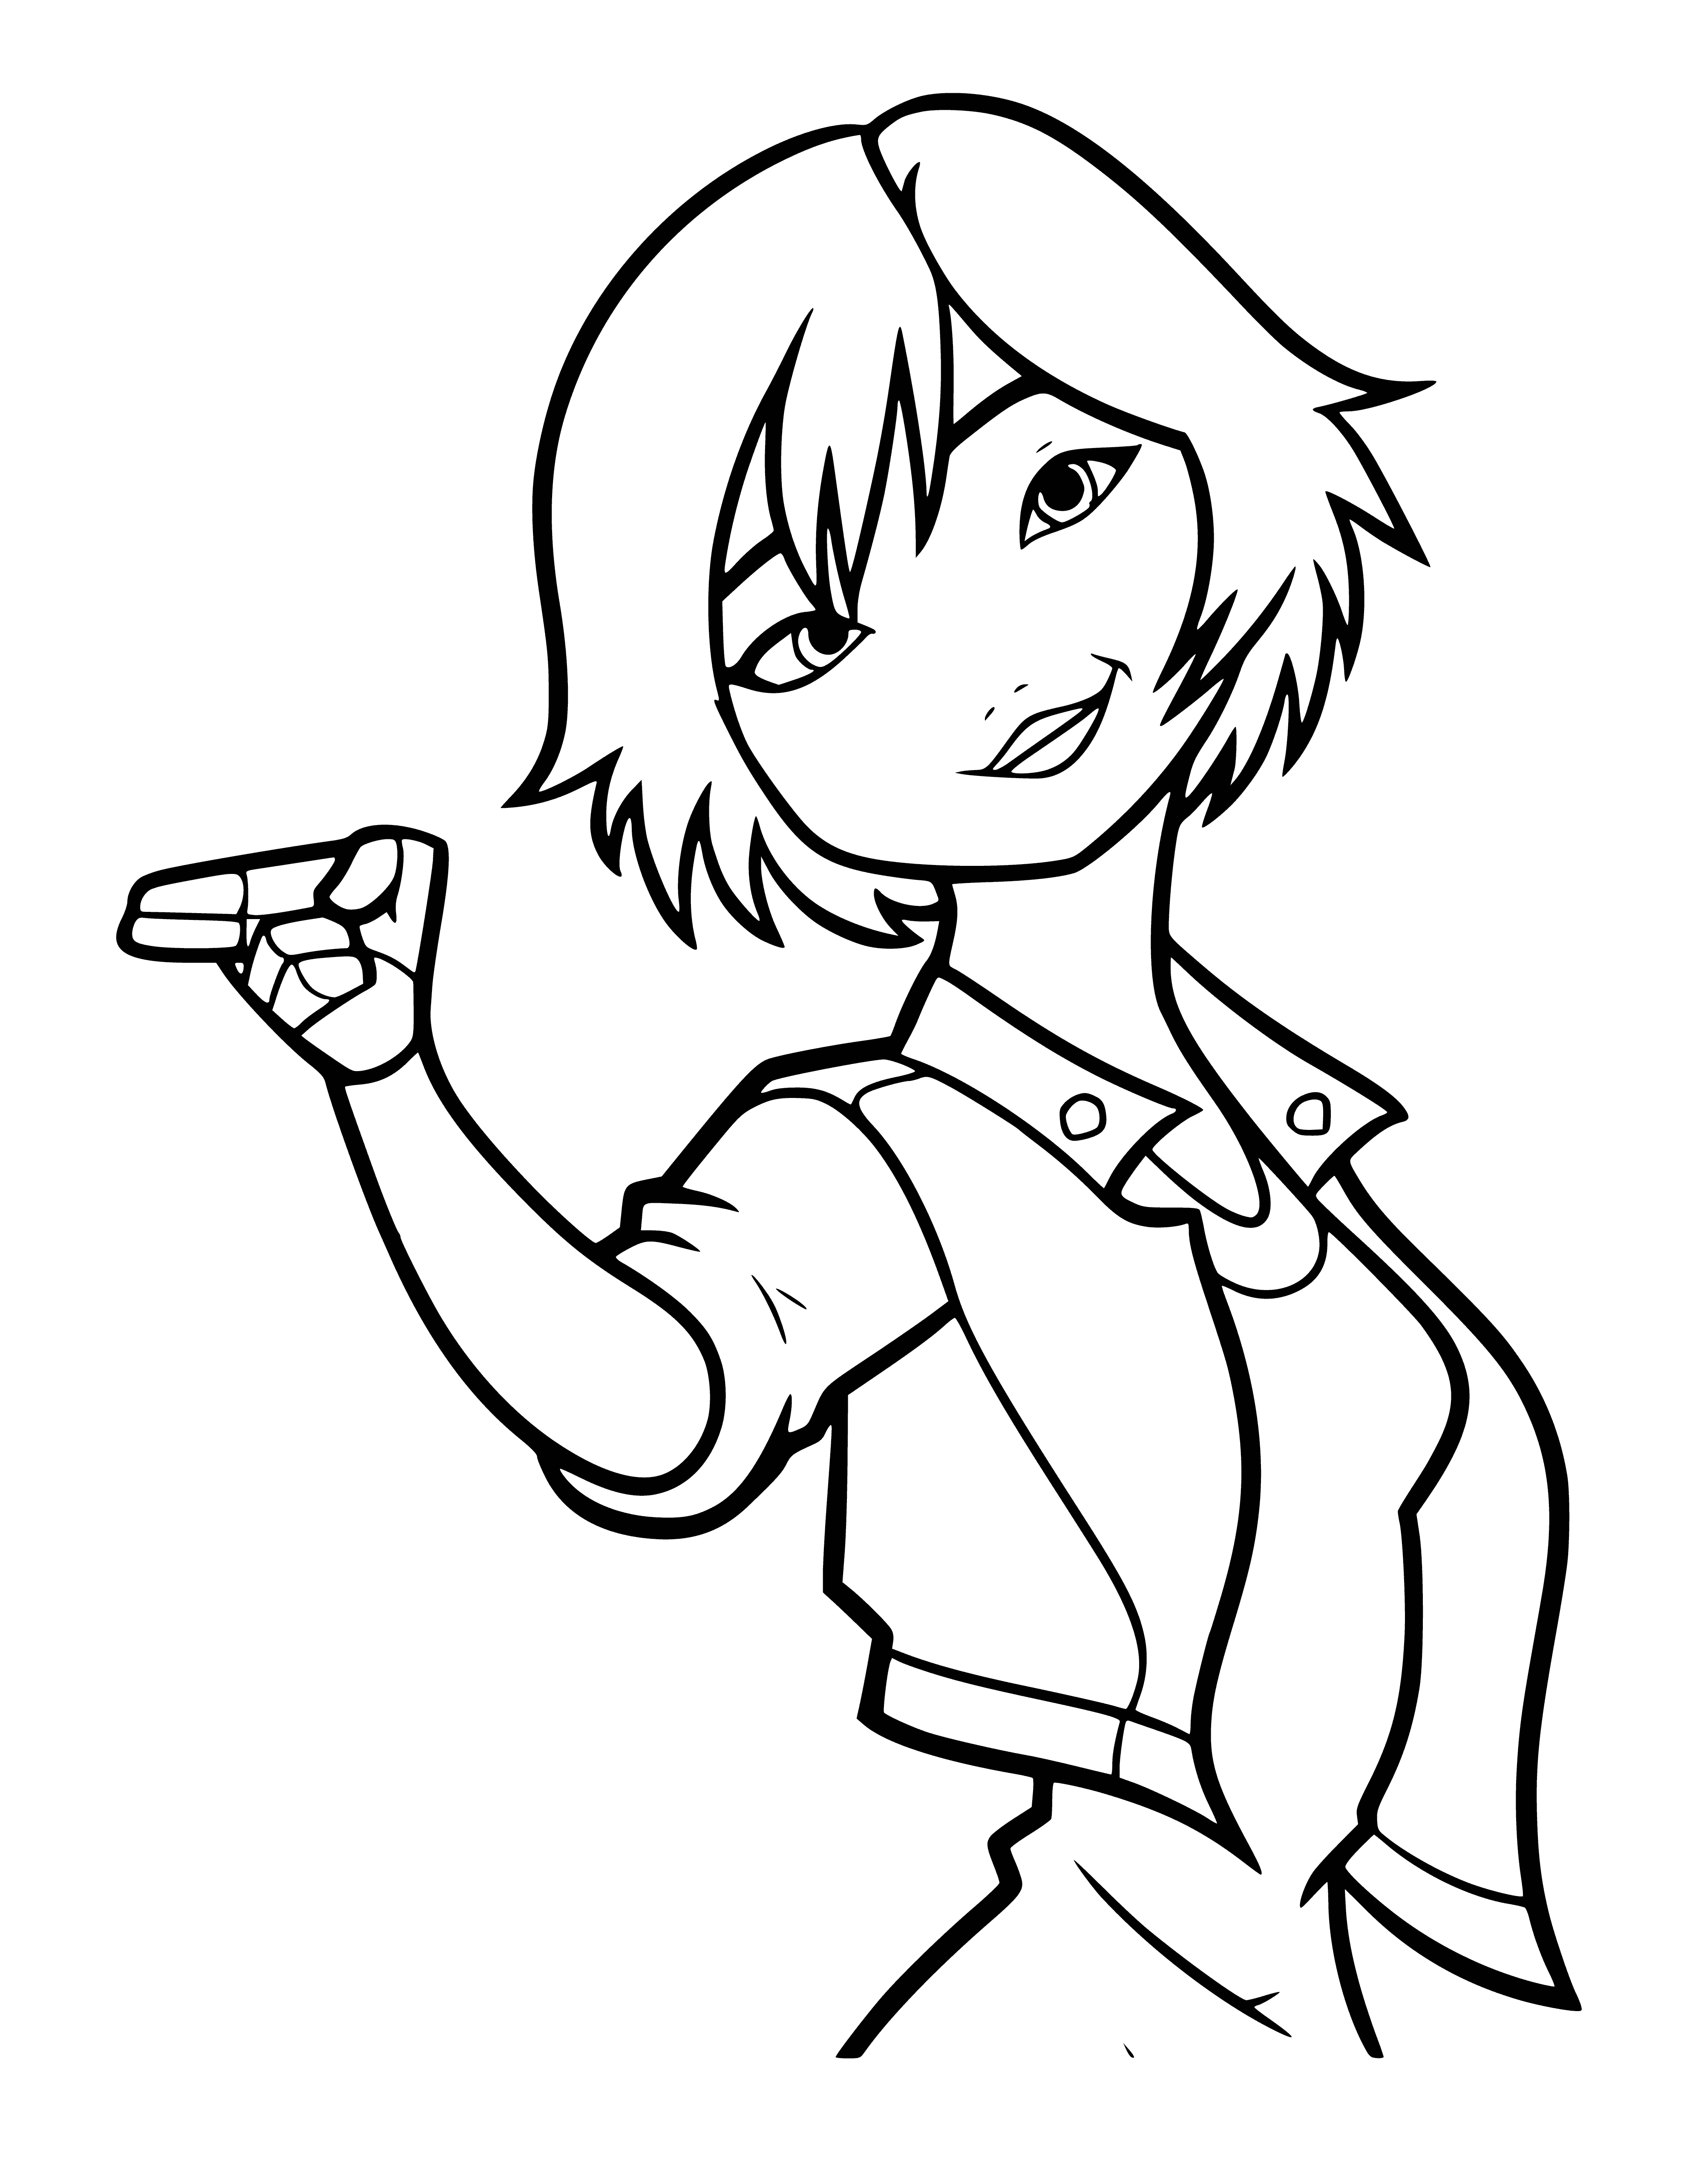 coloring page: Gogo Tomago is an Hispanic girl with black hair, an orange jumpsuit, brilliance, athleticism and a tomboy streak. #bighero6